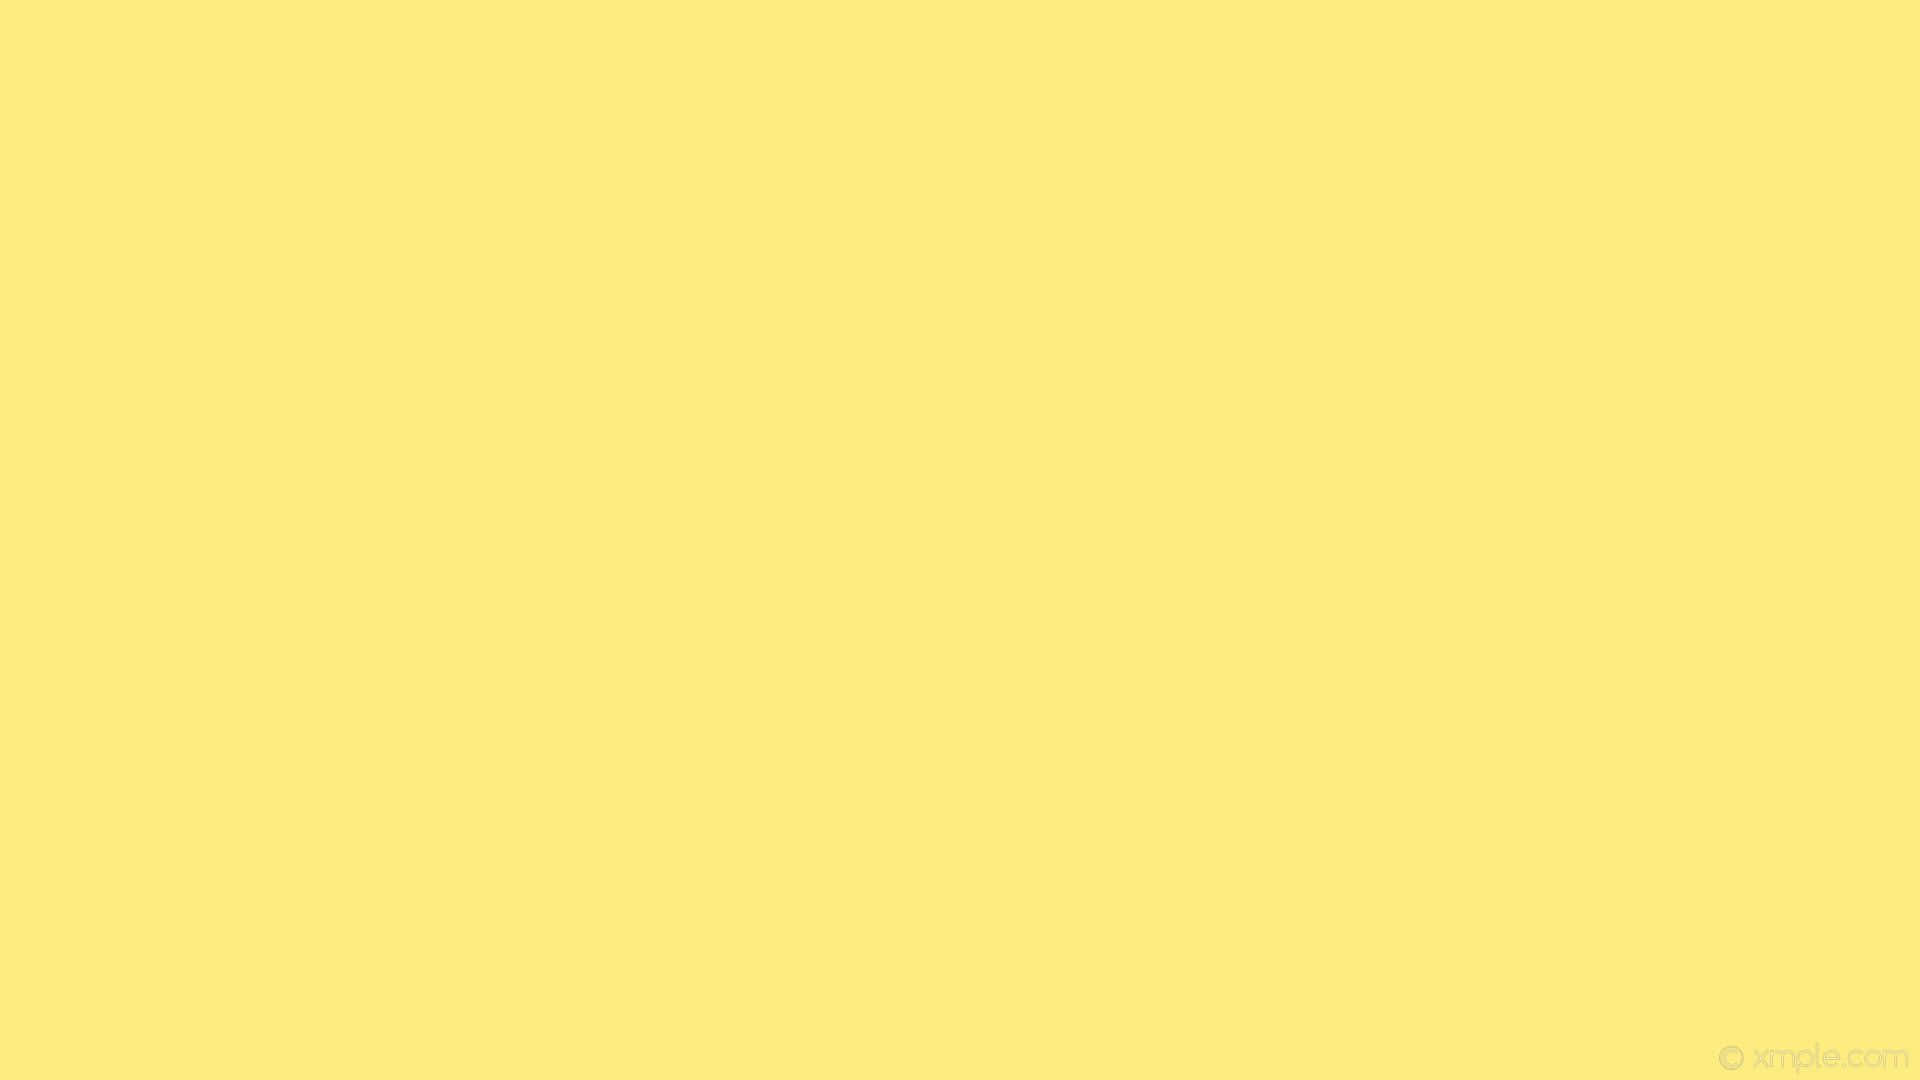 Bright yellow background with a vibrant energy